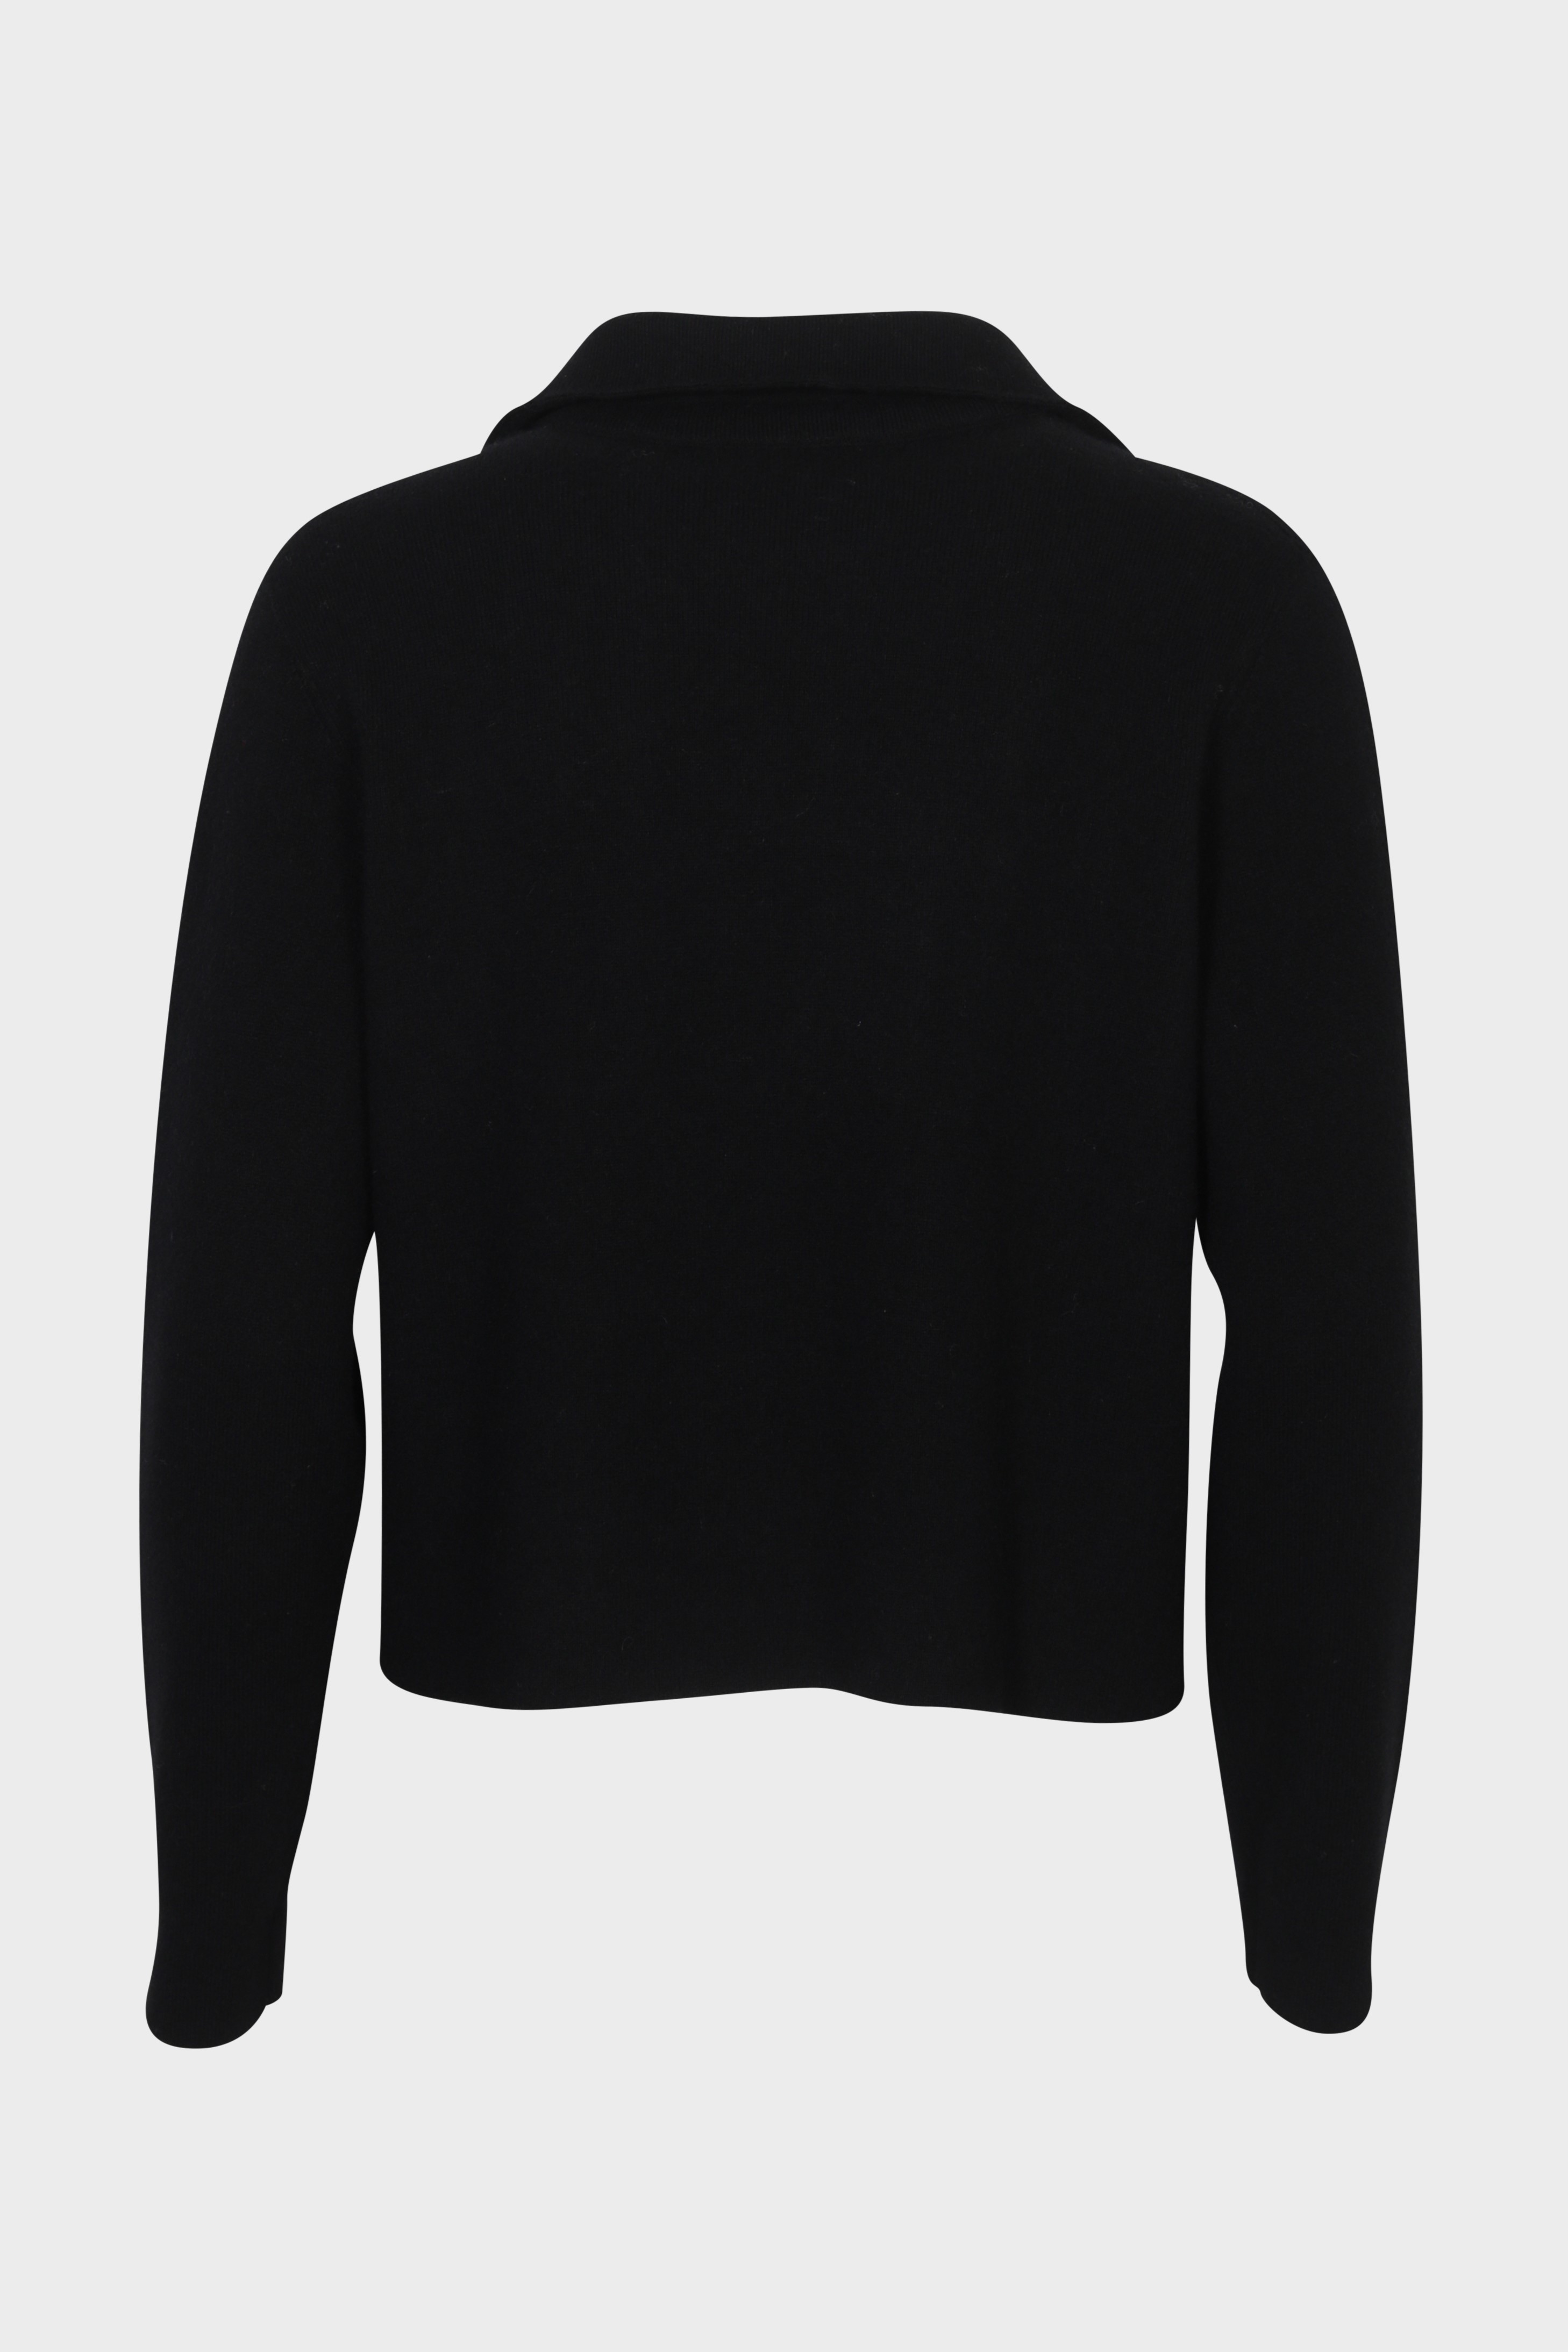 SMINFINITY Chilly Cropped Knit Jacket in Black S